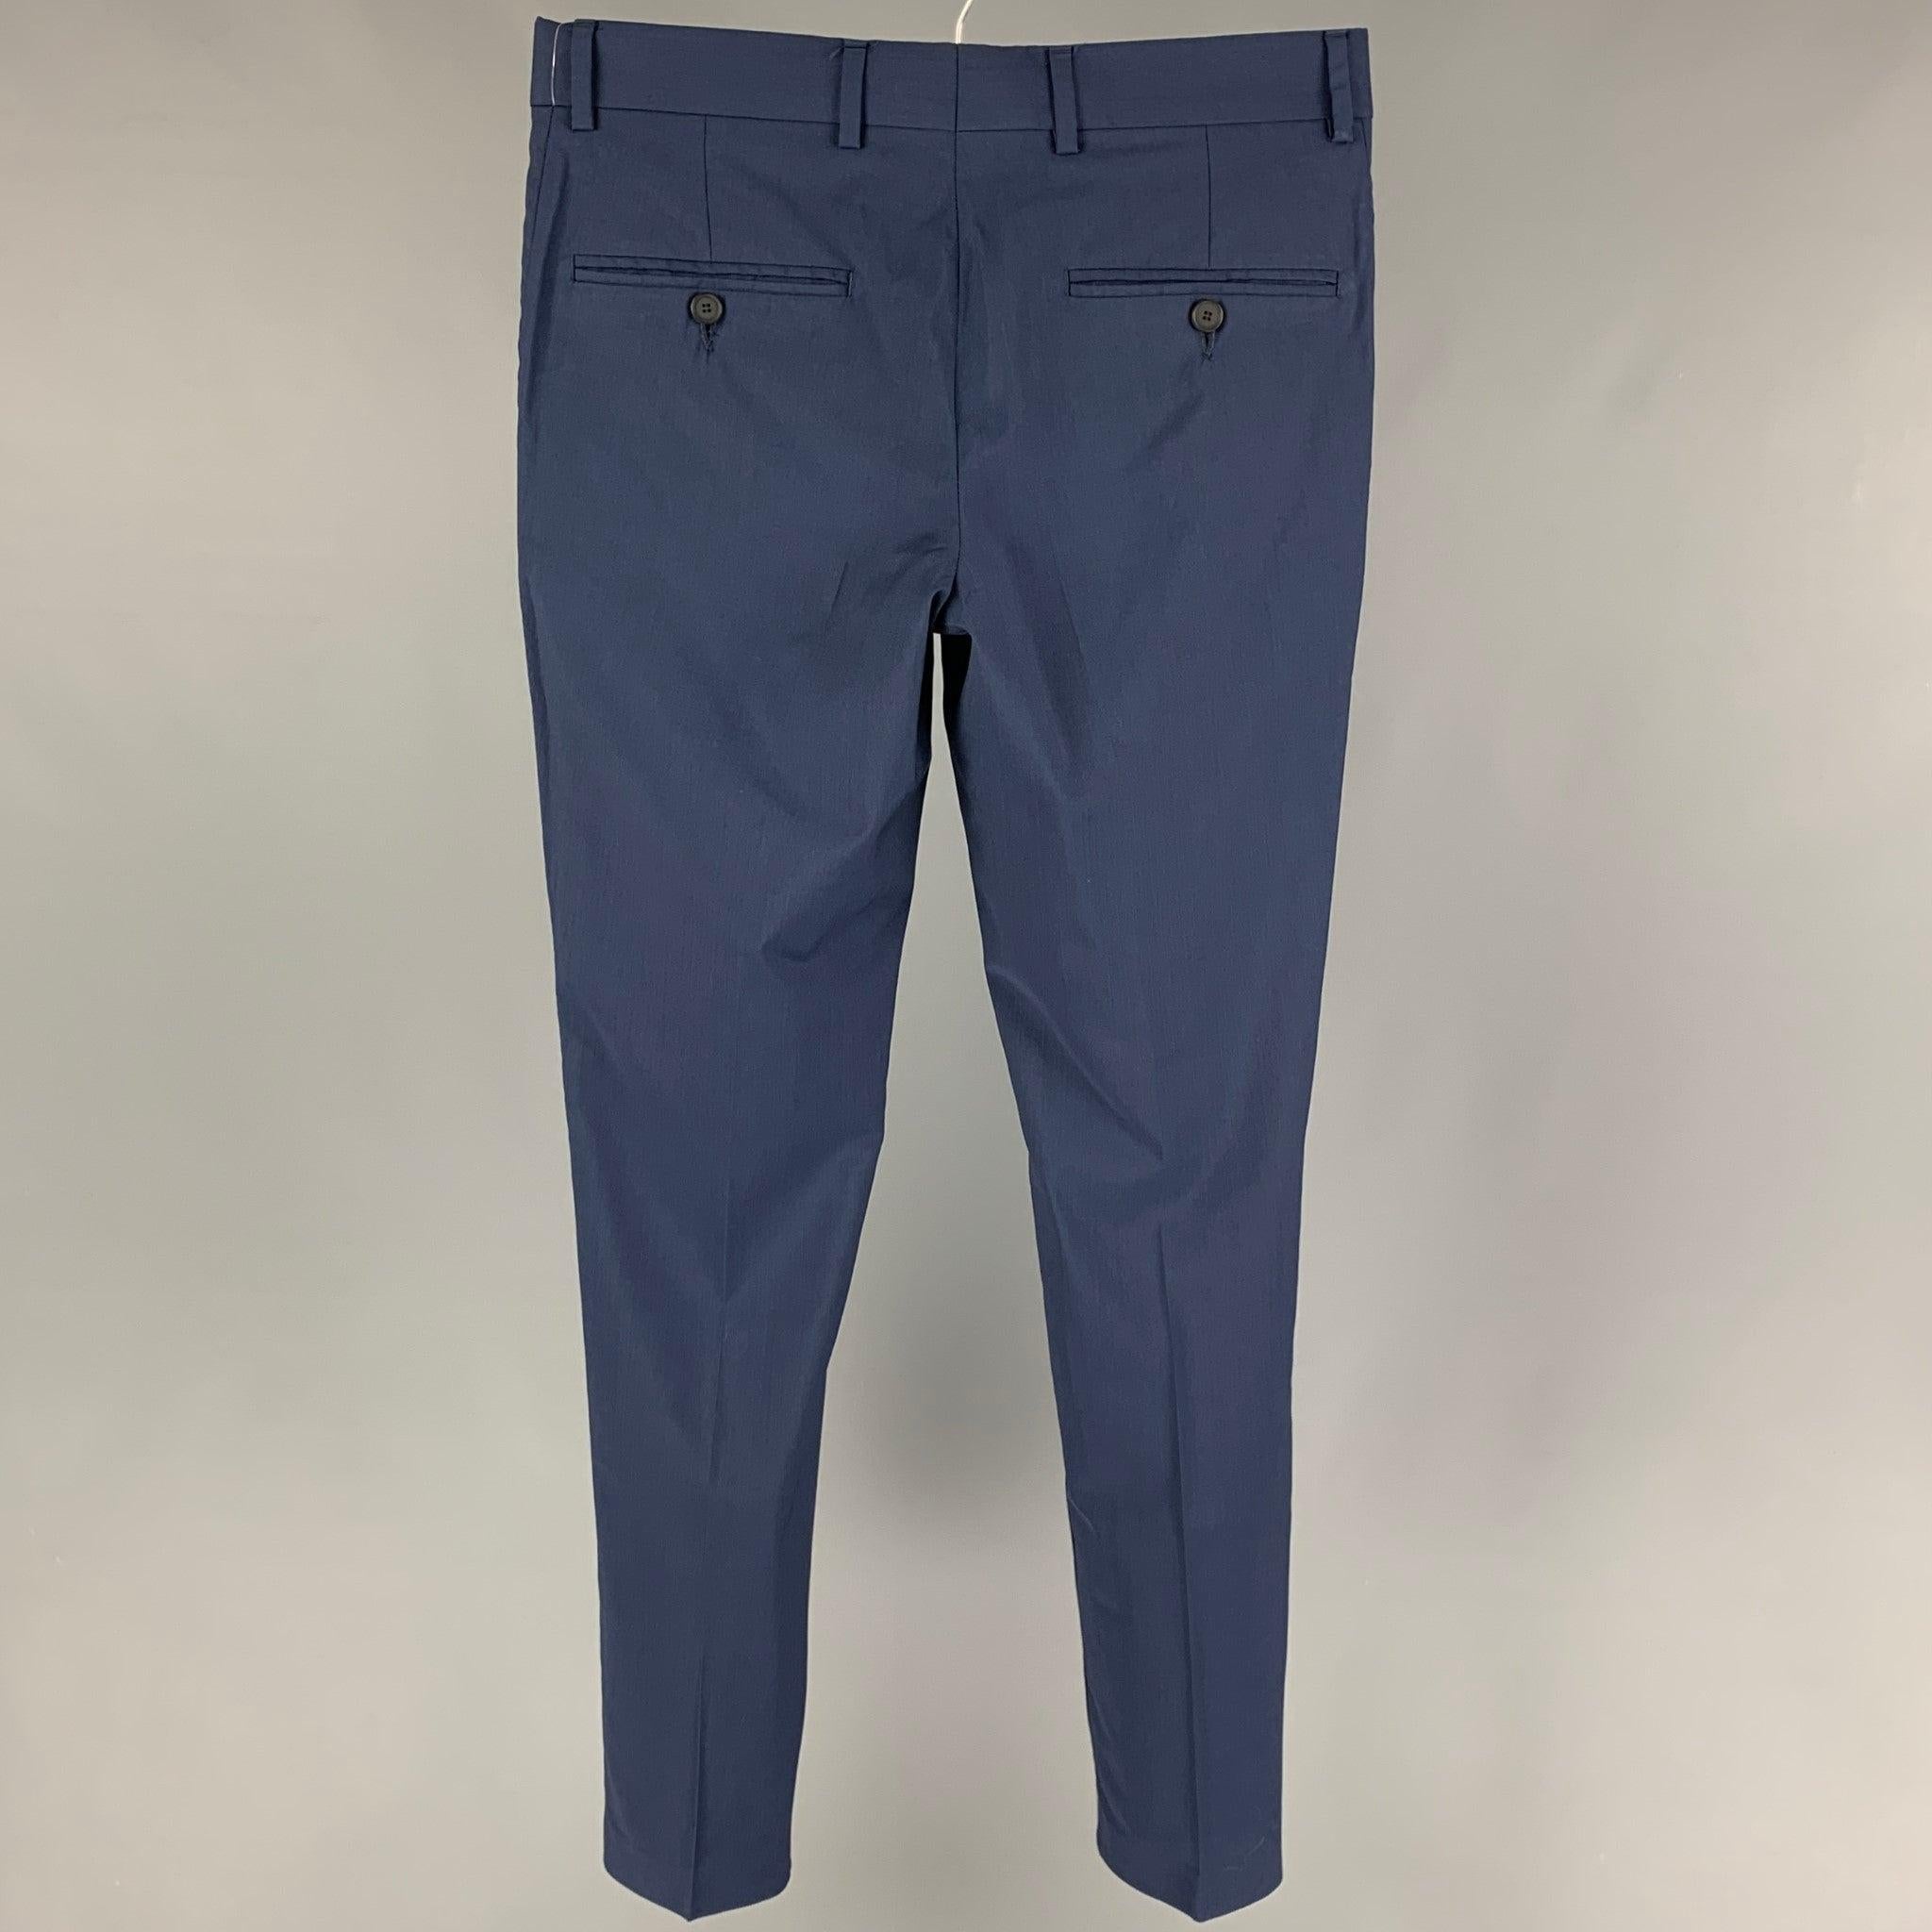 THE KOOPLES dress pants comes in a navy wool featuring a slim fit, front tab, and a zip fly closure.
Very Good
Pre-Owned Condition. 

Marked:   44 

Measurements: 
  Waist: 30 inches  Rise: 9 inches Inseam: 33 inches 
  
  
 
Reference: